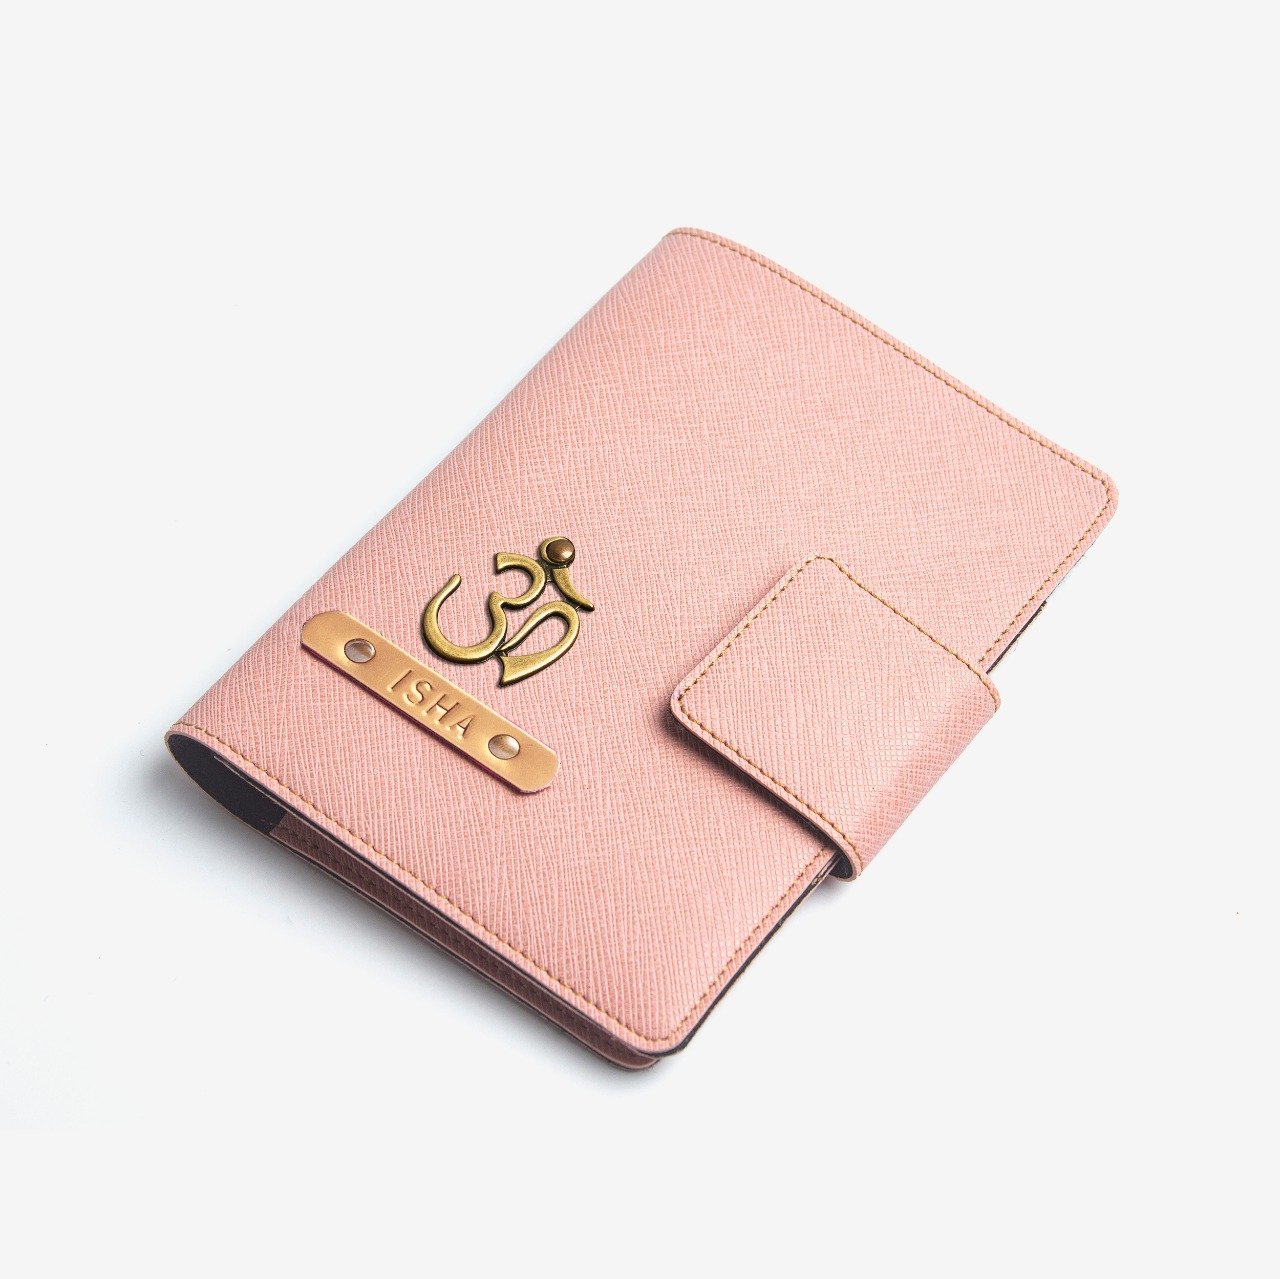 Rfid Protection Personalized Passport Cover with Name Designer Customized Passport  Holder Travel Accessories Passport Case